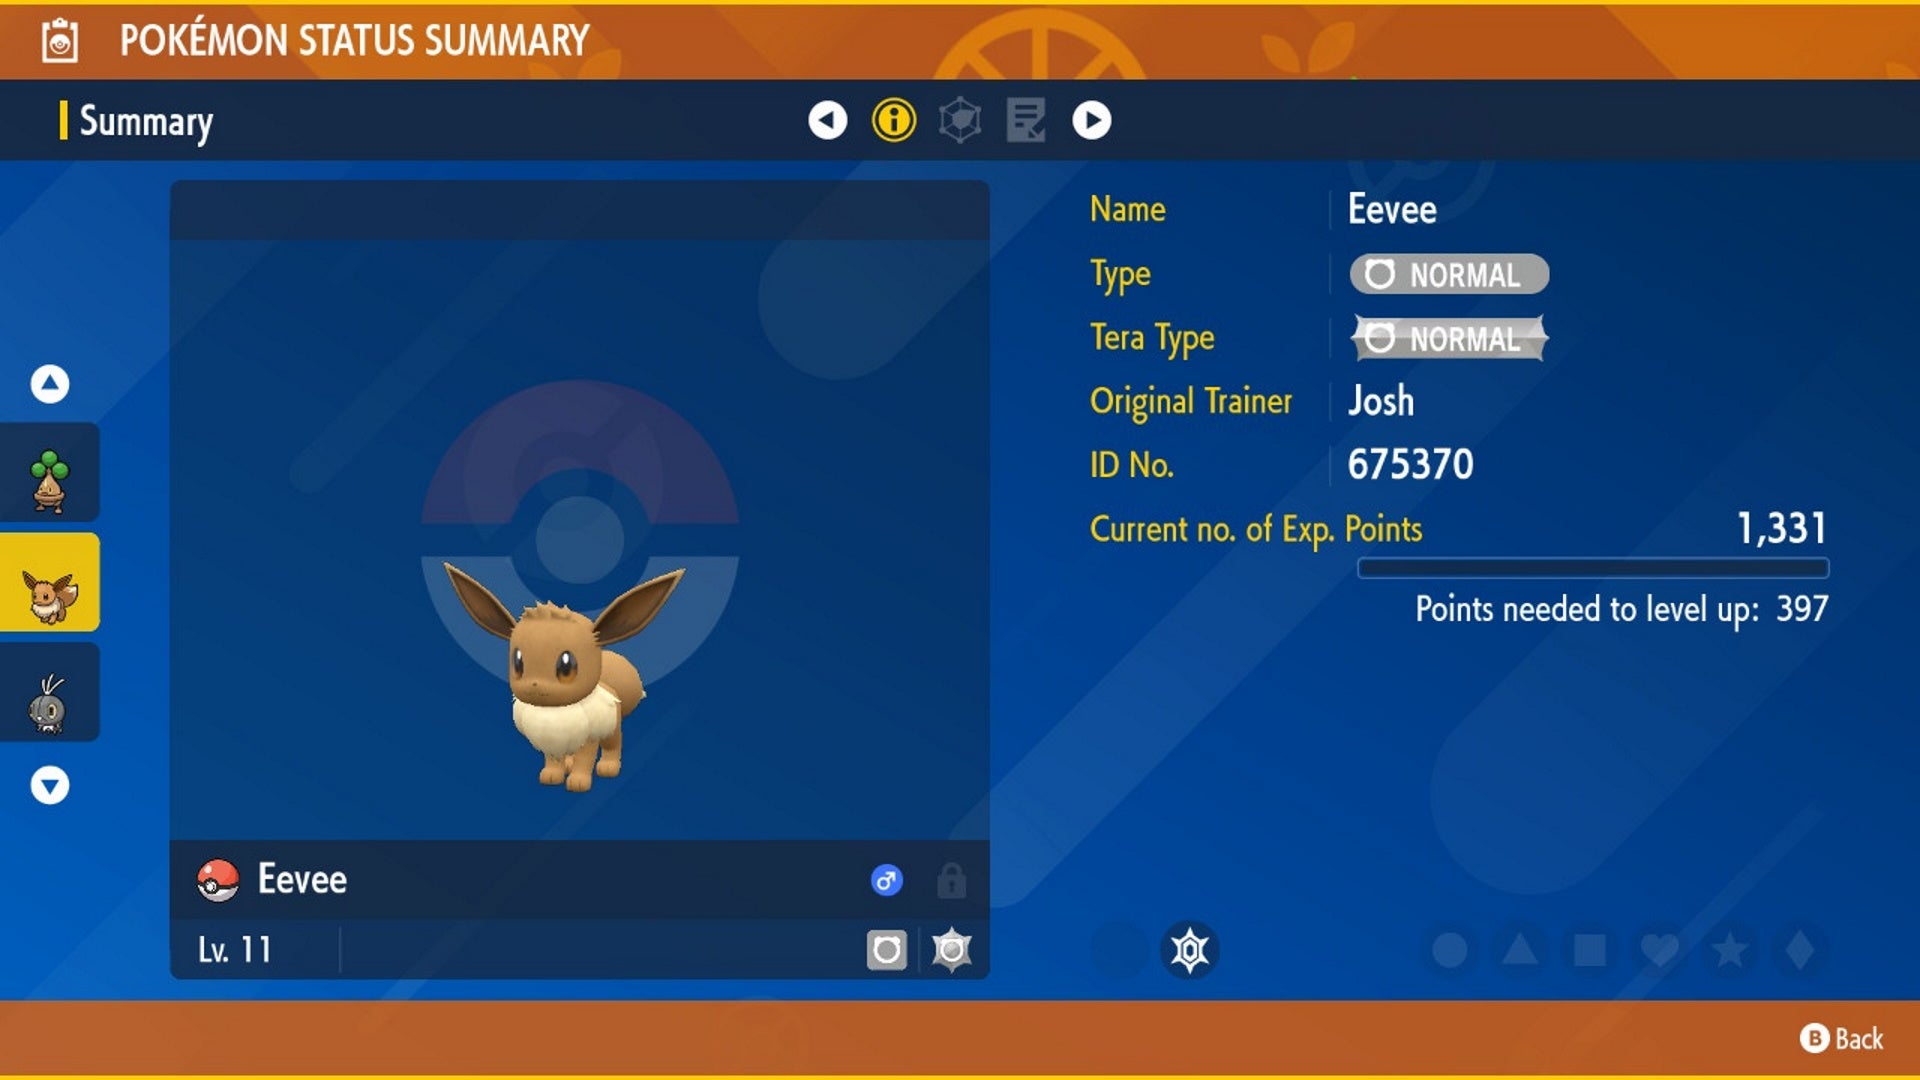 Pokemon Scarlet and Violet Hidden Abilities: A menu page shows Eevee, a small brown dog-like creature with large ears, in the center